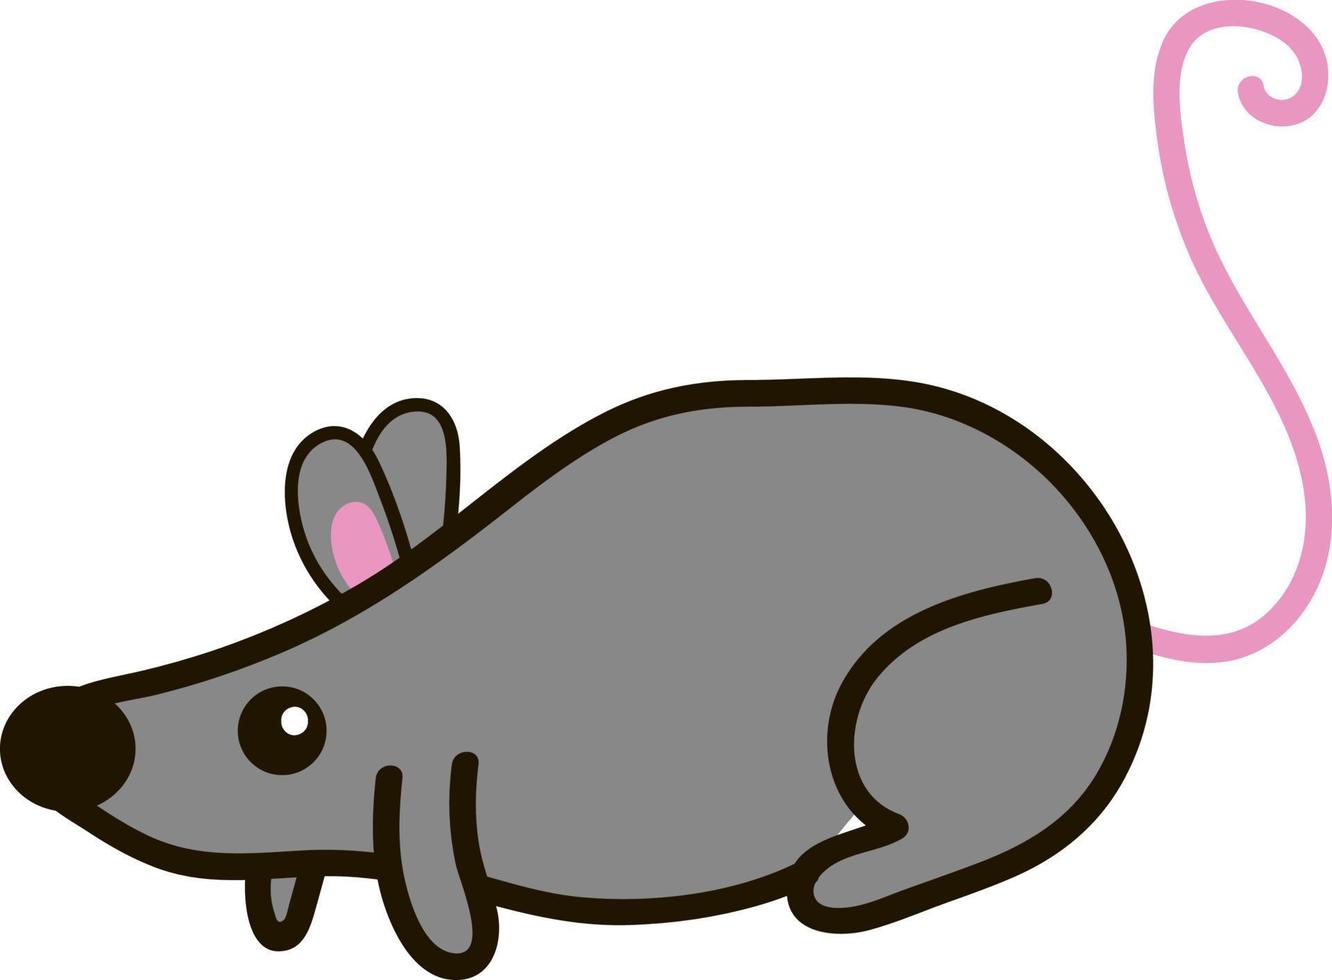 Gray mouse, illustration, vector on white background.